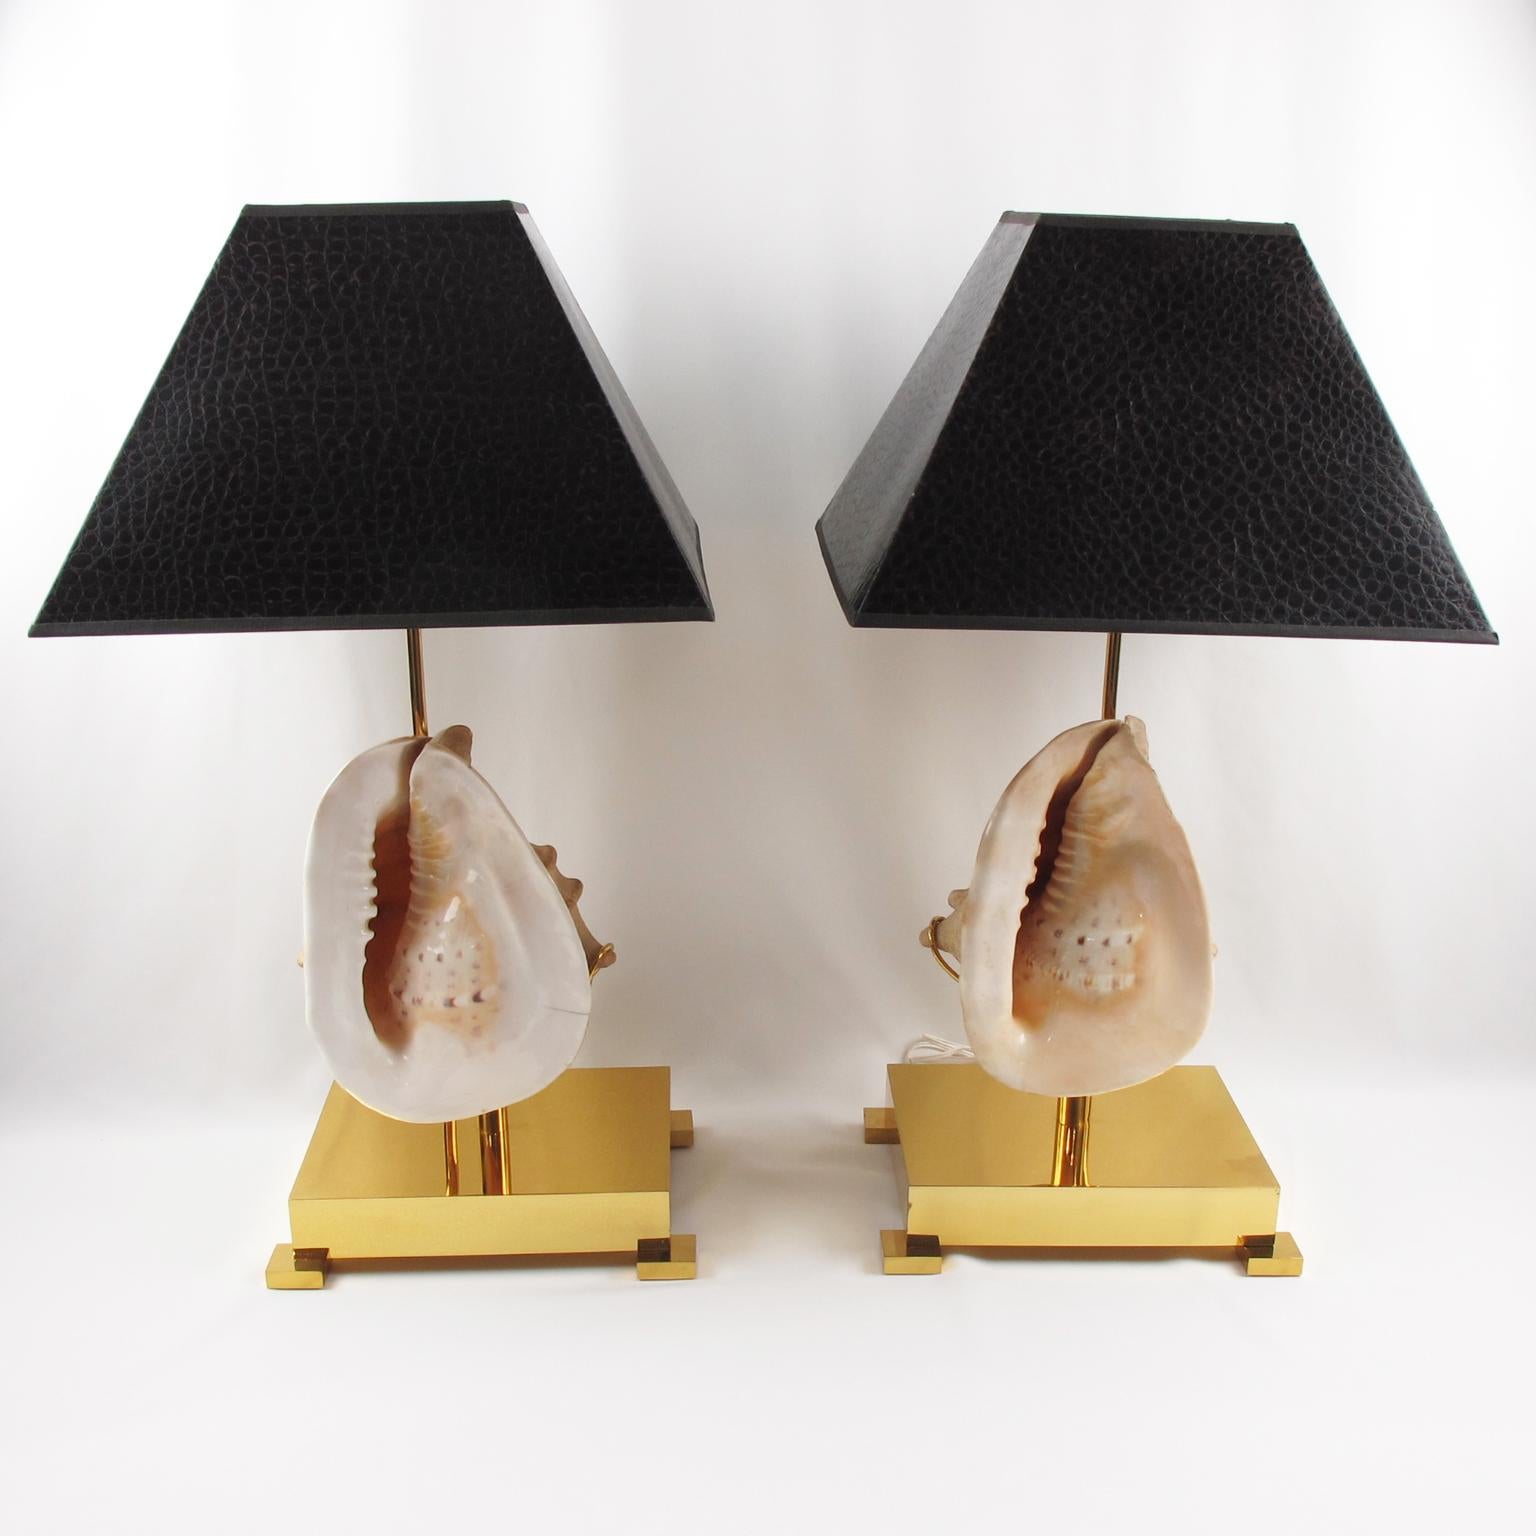 Willy Daro designed these stunning table lamps in the 1970s. These lamps boast oversized sea shells mounted on a square polished brass base. 
The lampshades are geometrically shaped in dark brown color with a textured faux crocodile skin